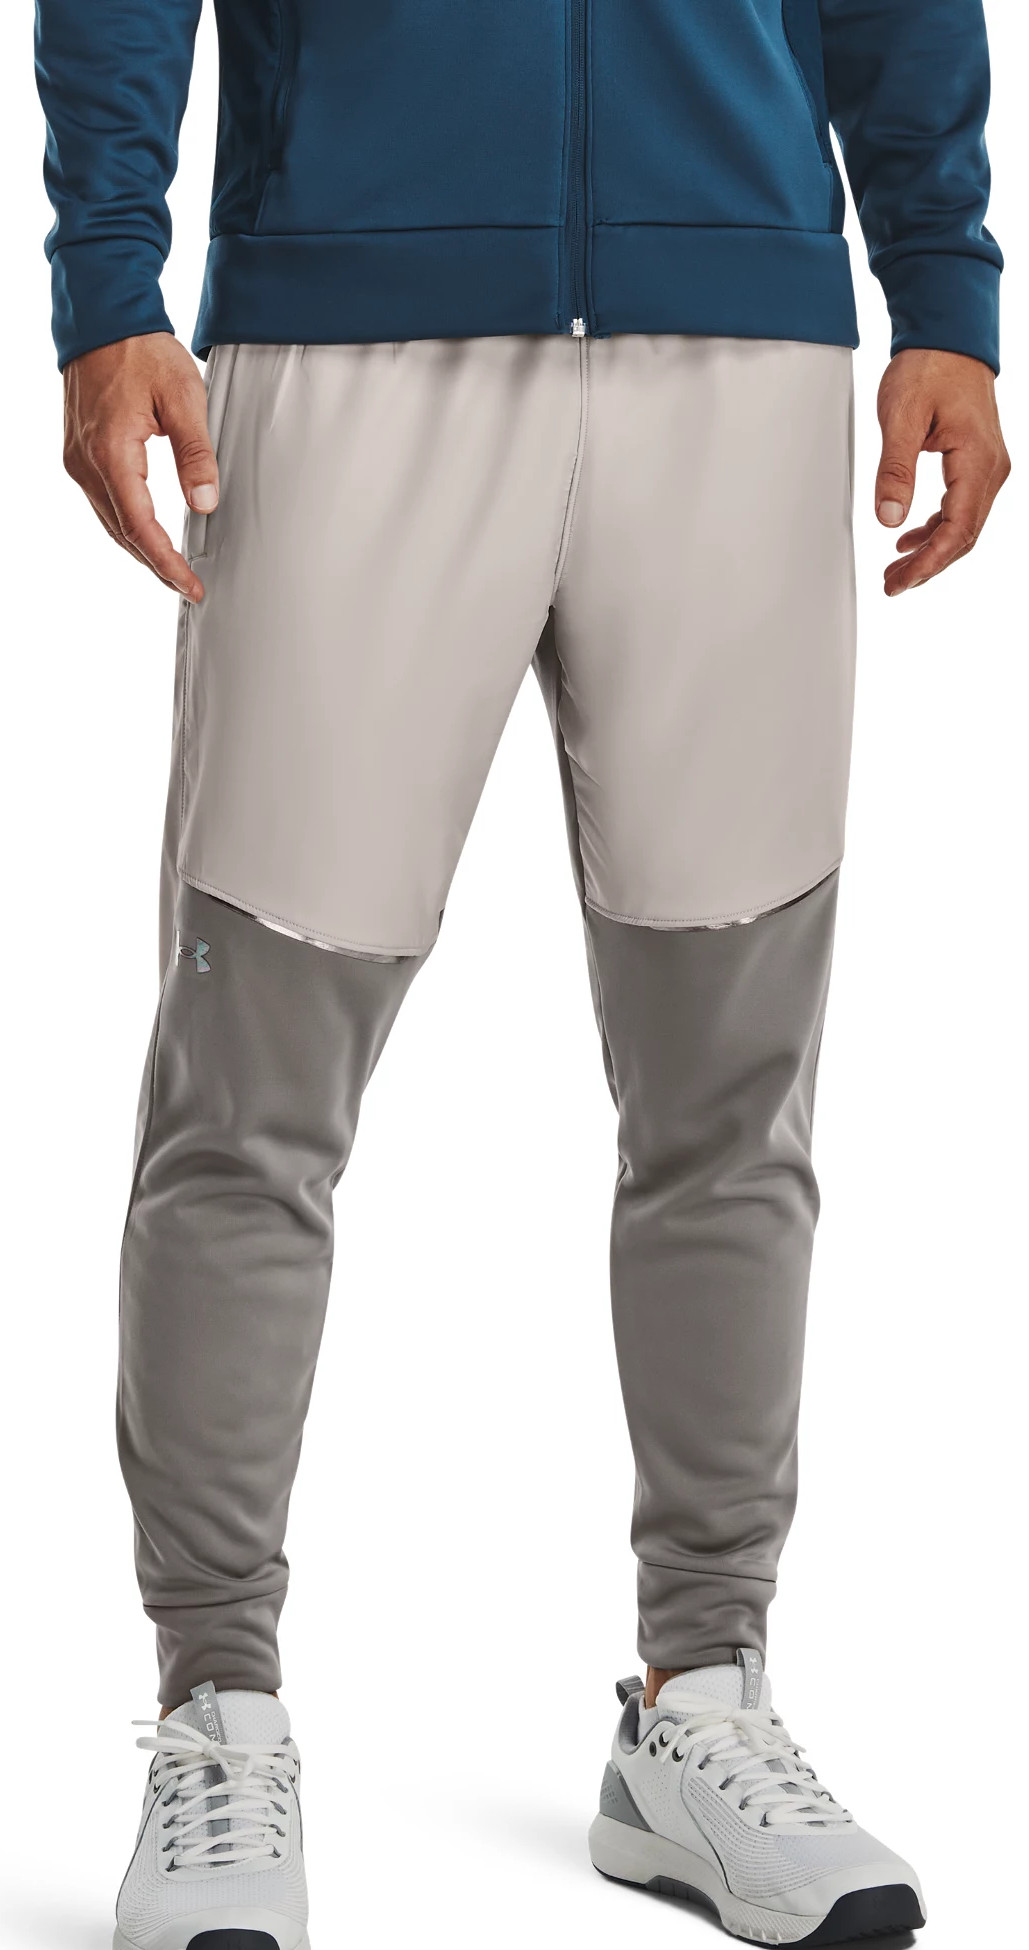 https://i1.t4s.cz/products/1375401-592/under-armour-ua-af-storm-pants-gry-515939-1375401-592.jpg